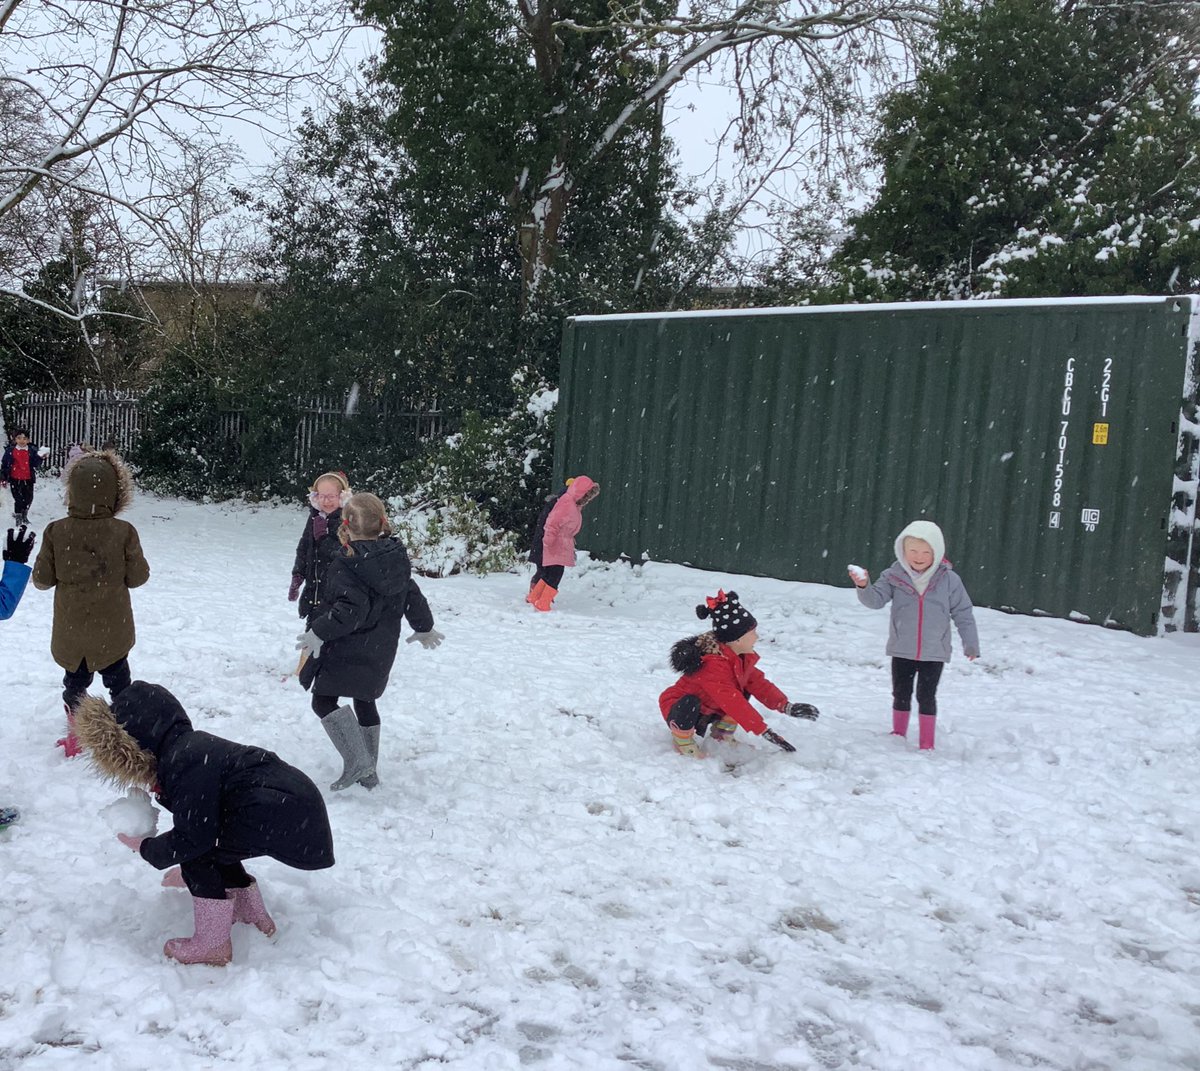 We have had a lovely play in the snow this morning! #funinthesnow #snowinmarch but now it’s raining! 🙁☔️